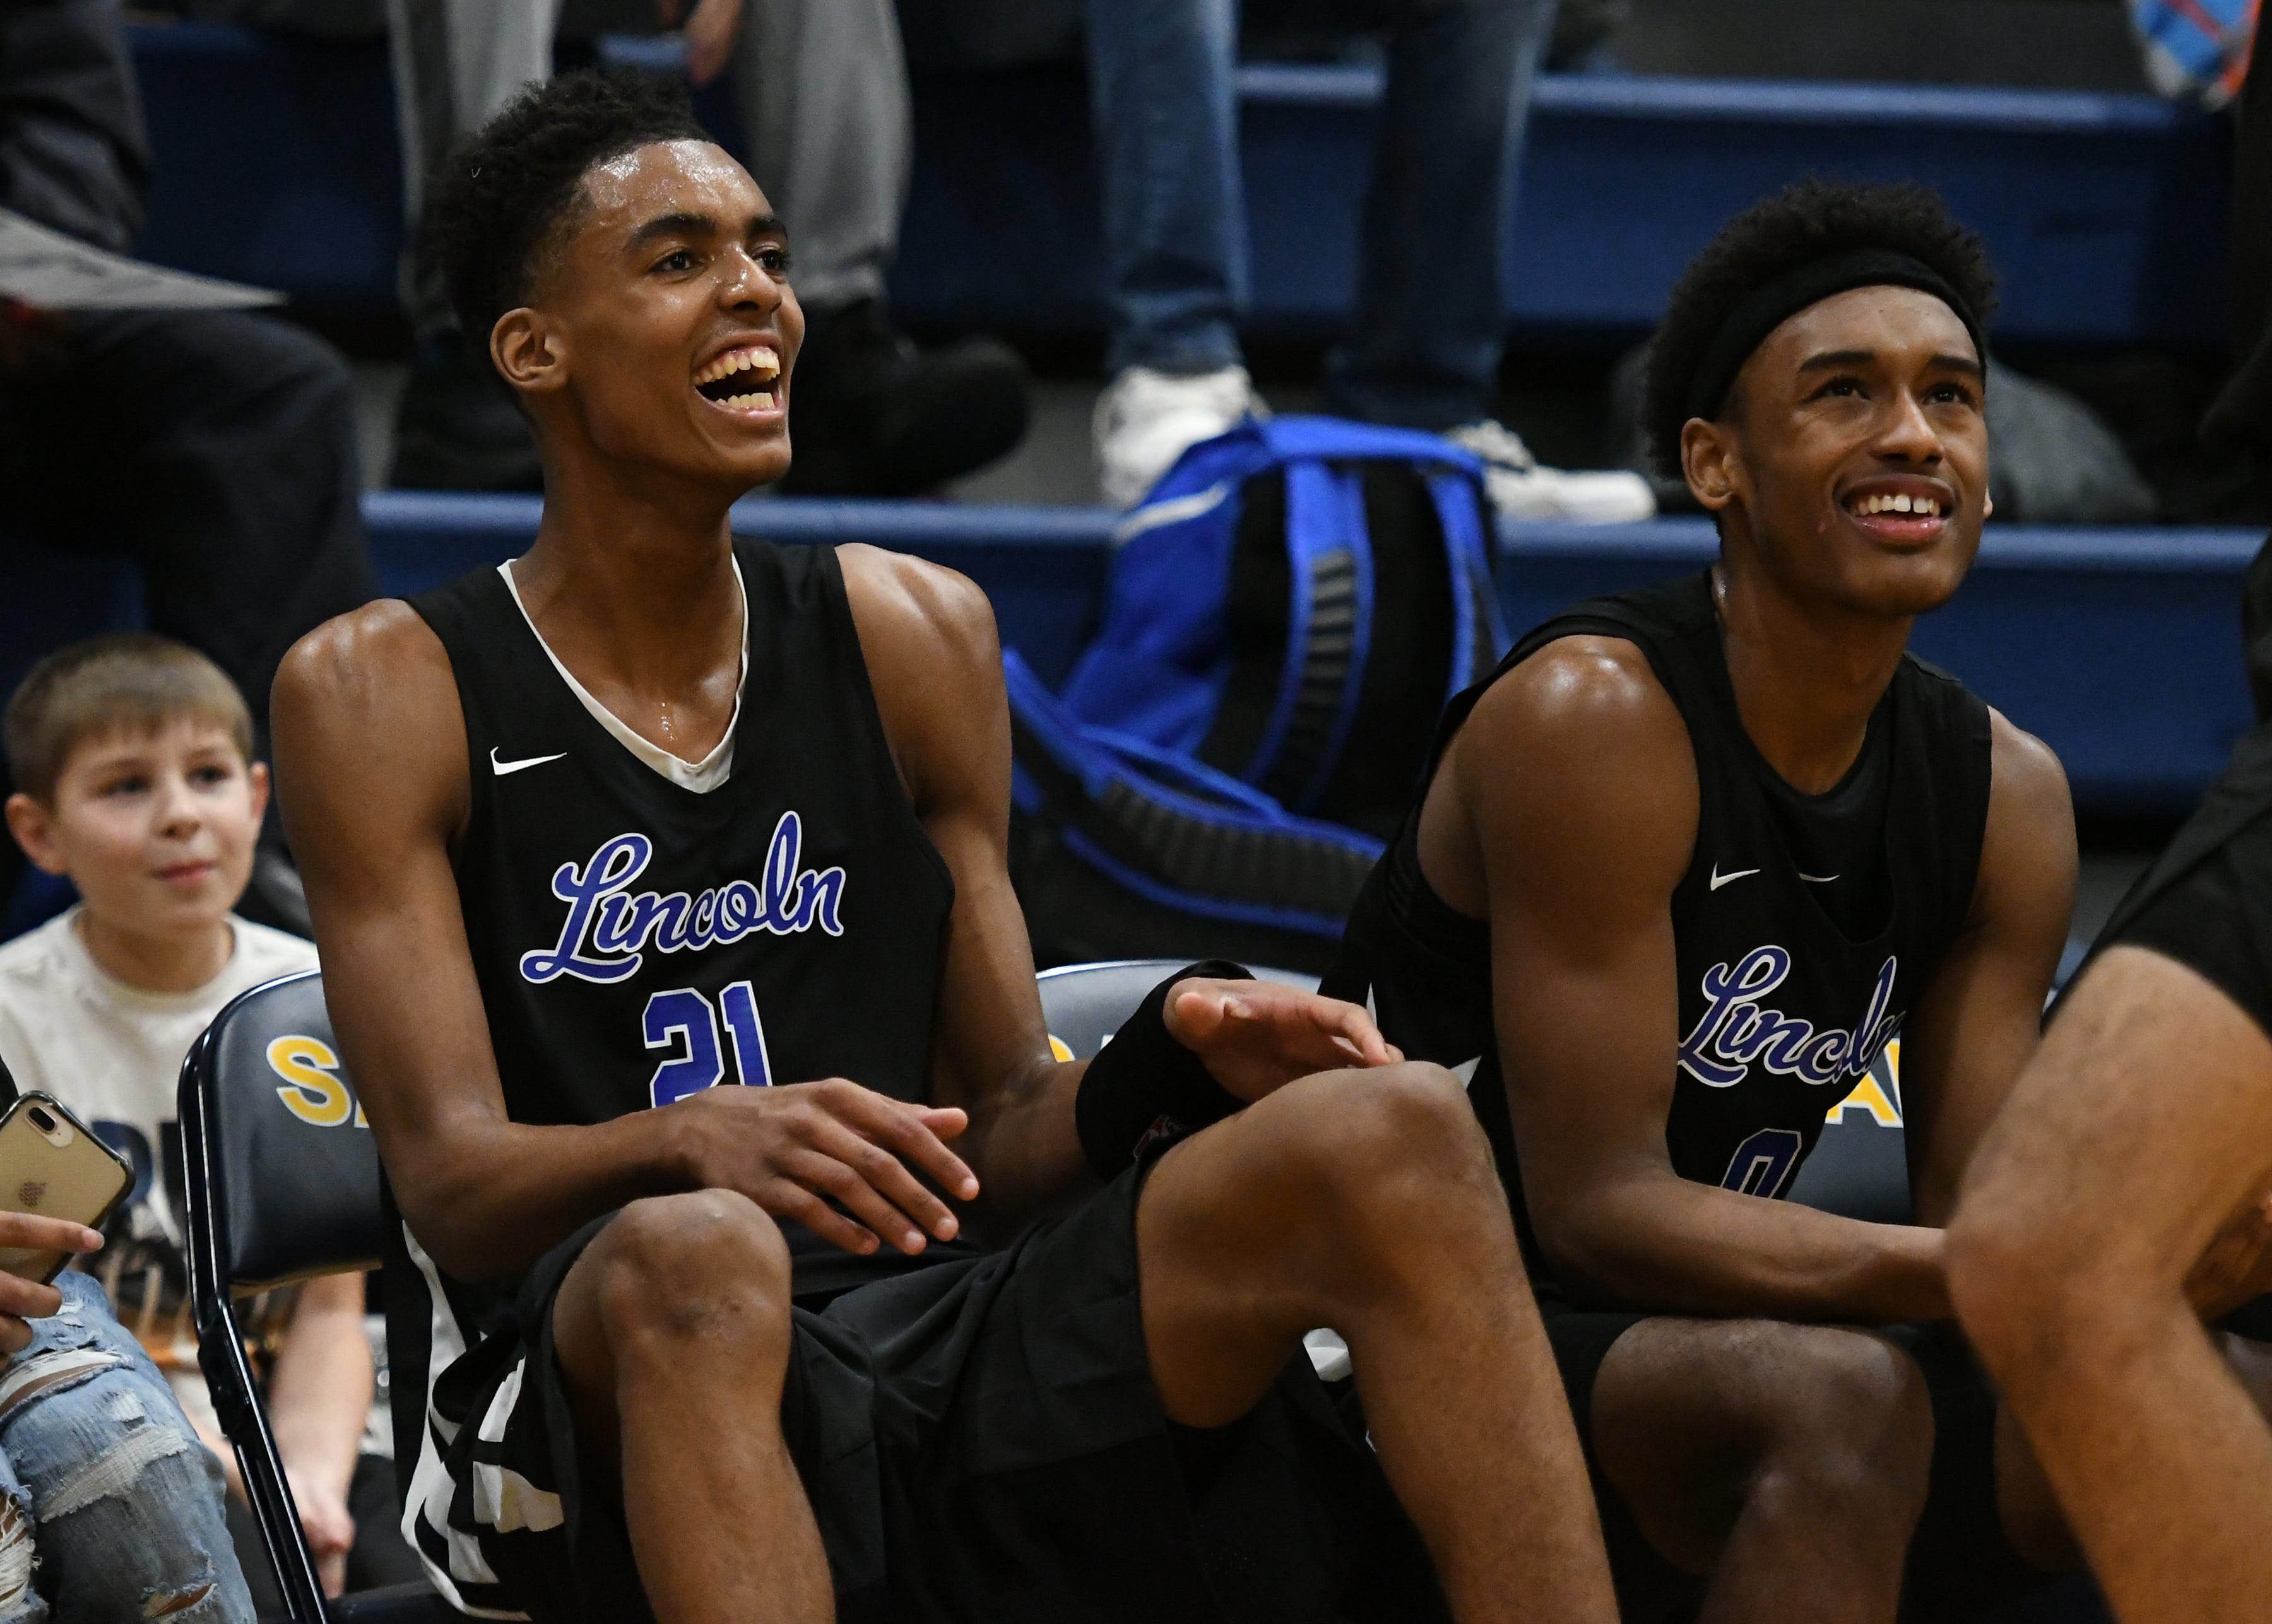 Emoni Bates, left, enjoys watching the final minutes of Lincoln's 70-39 win over Saline from the bench.